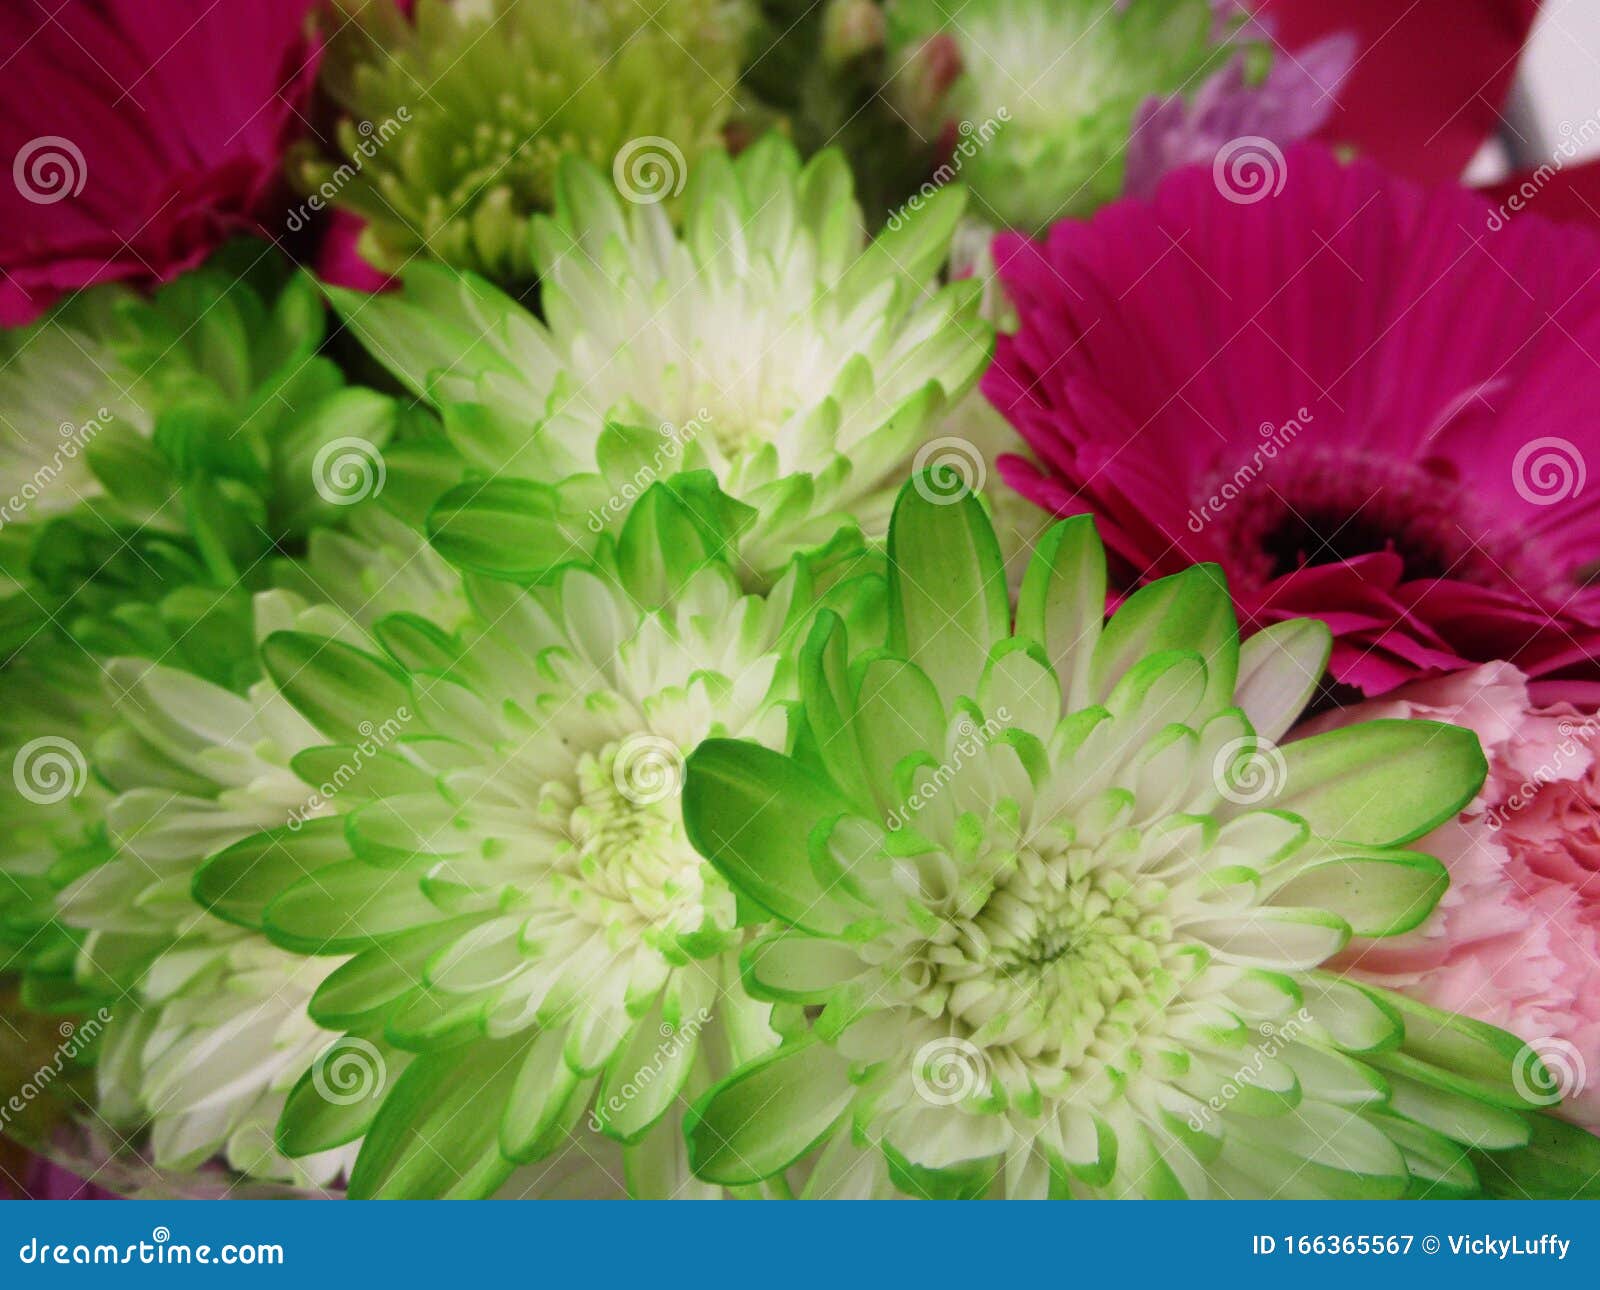 Bright Sweet Colorful Green White Dahlia Flower in Bloom, 2019 Stock ...